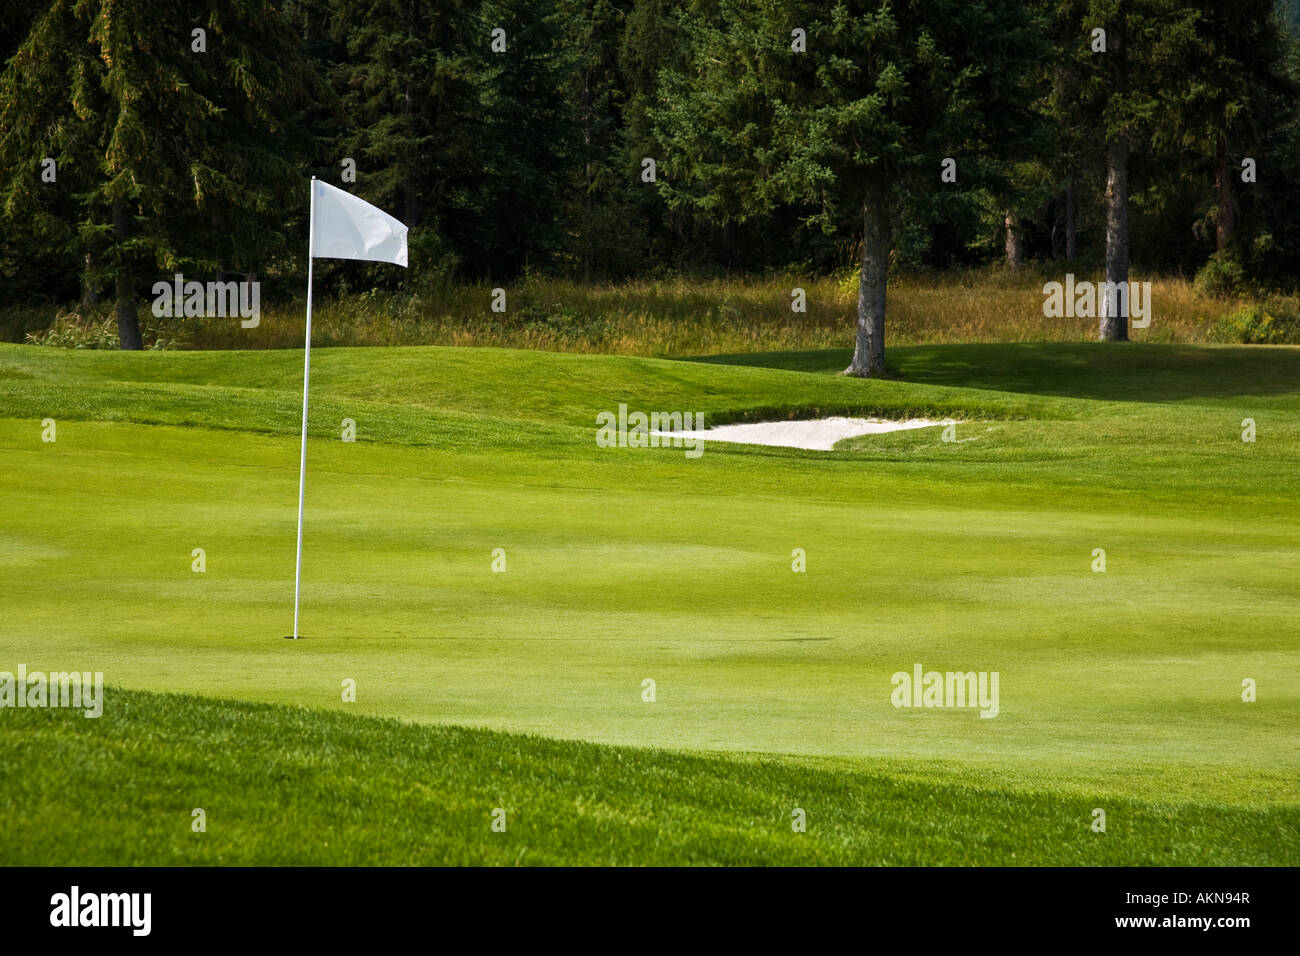 Putting green on a golf course, Fairmont, BC, Canada Stock Photo